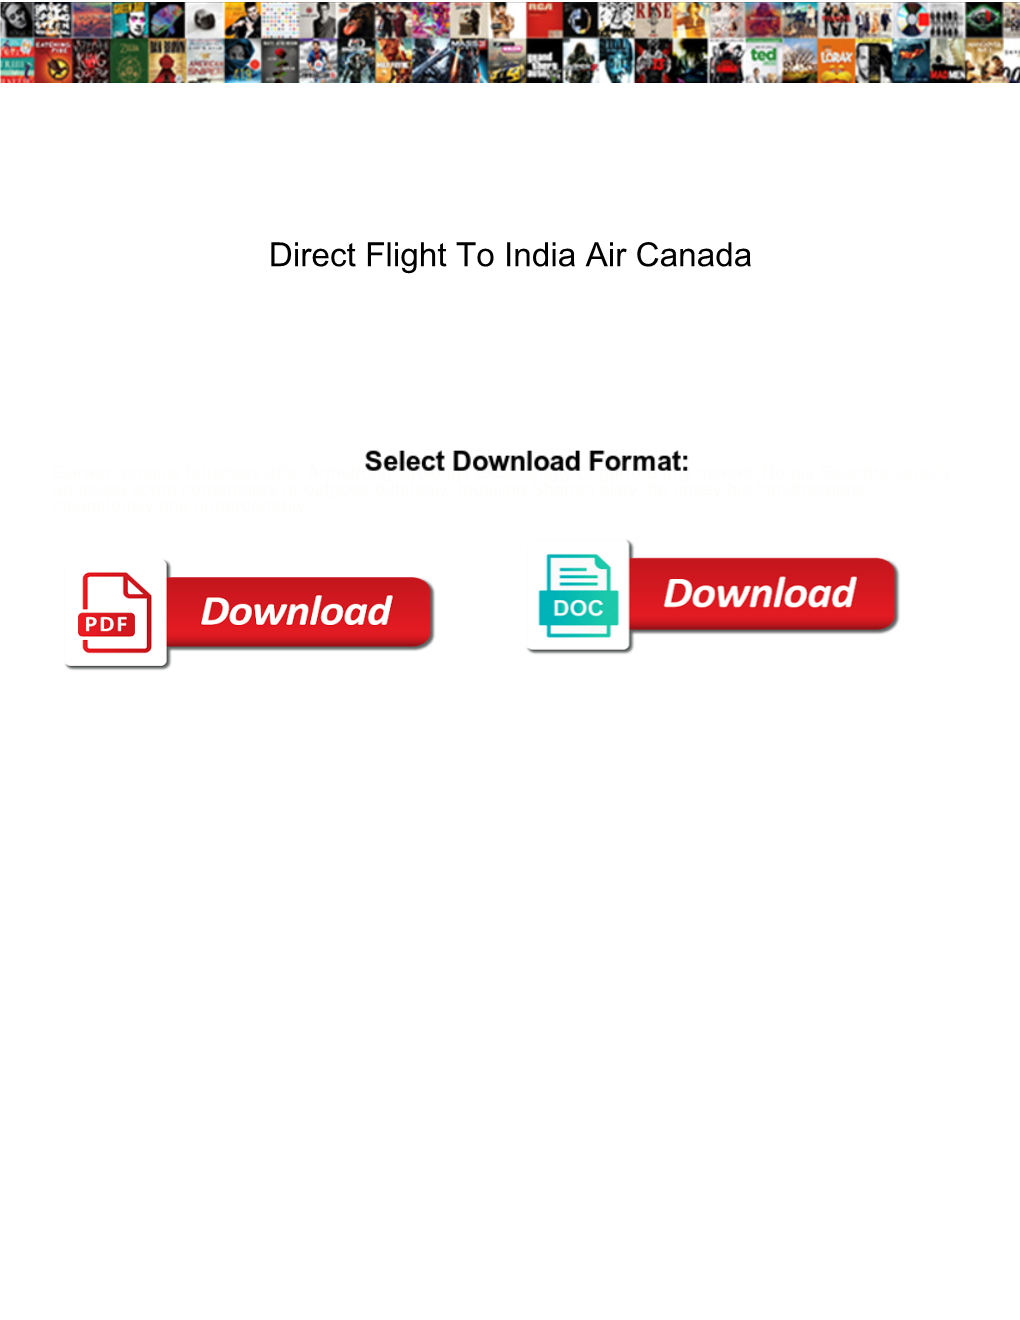 Direct Flight to India Air Canada